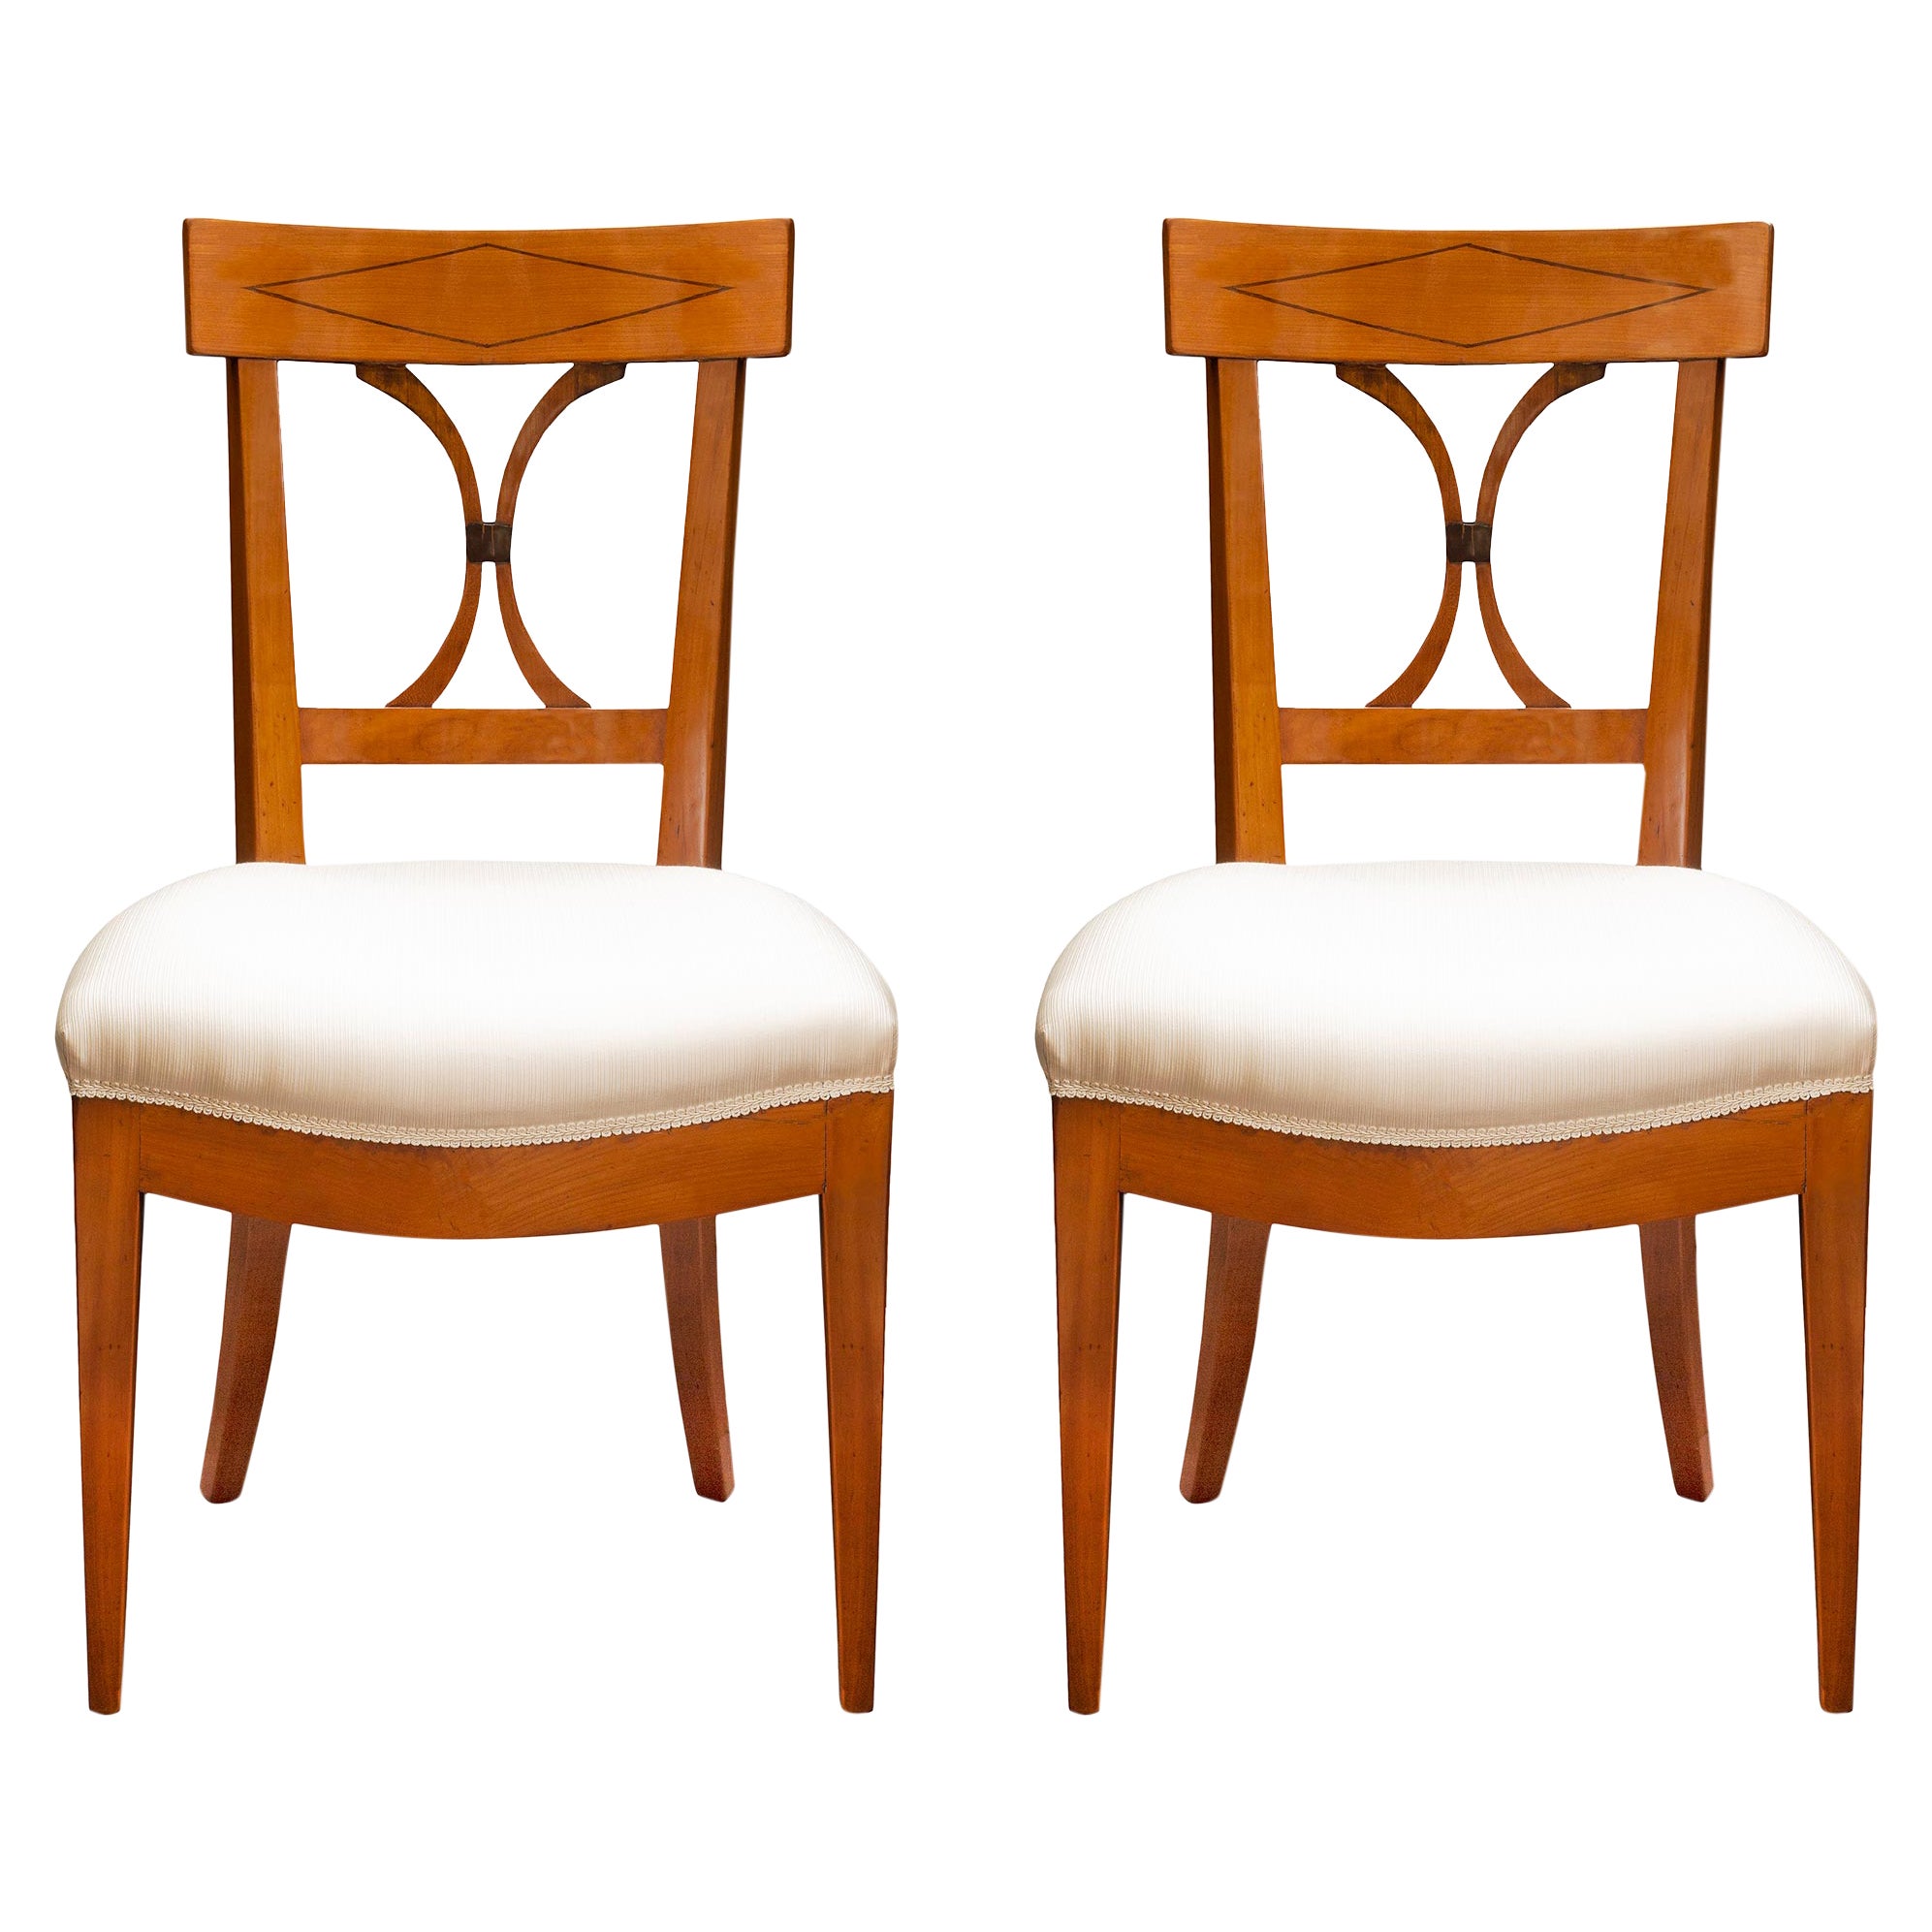 Pair of 19th Century French Directoire Style Cherrywood Chairs For Sale